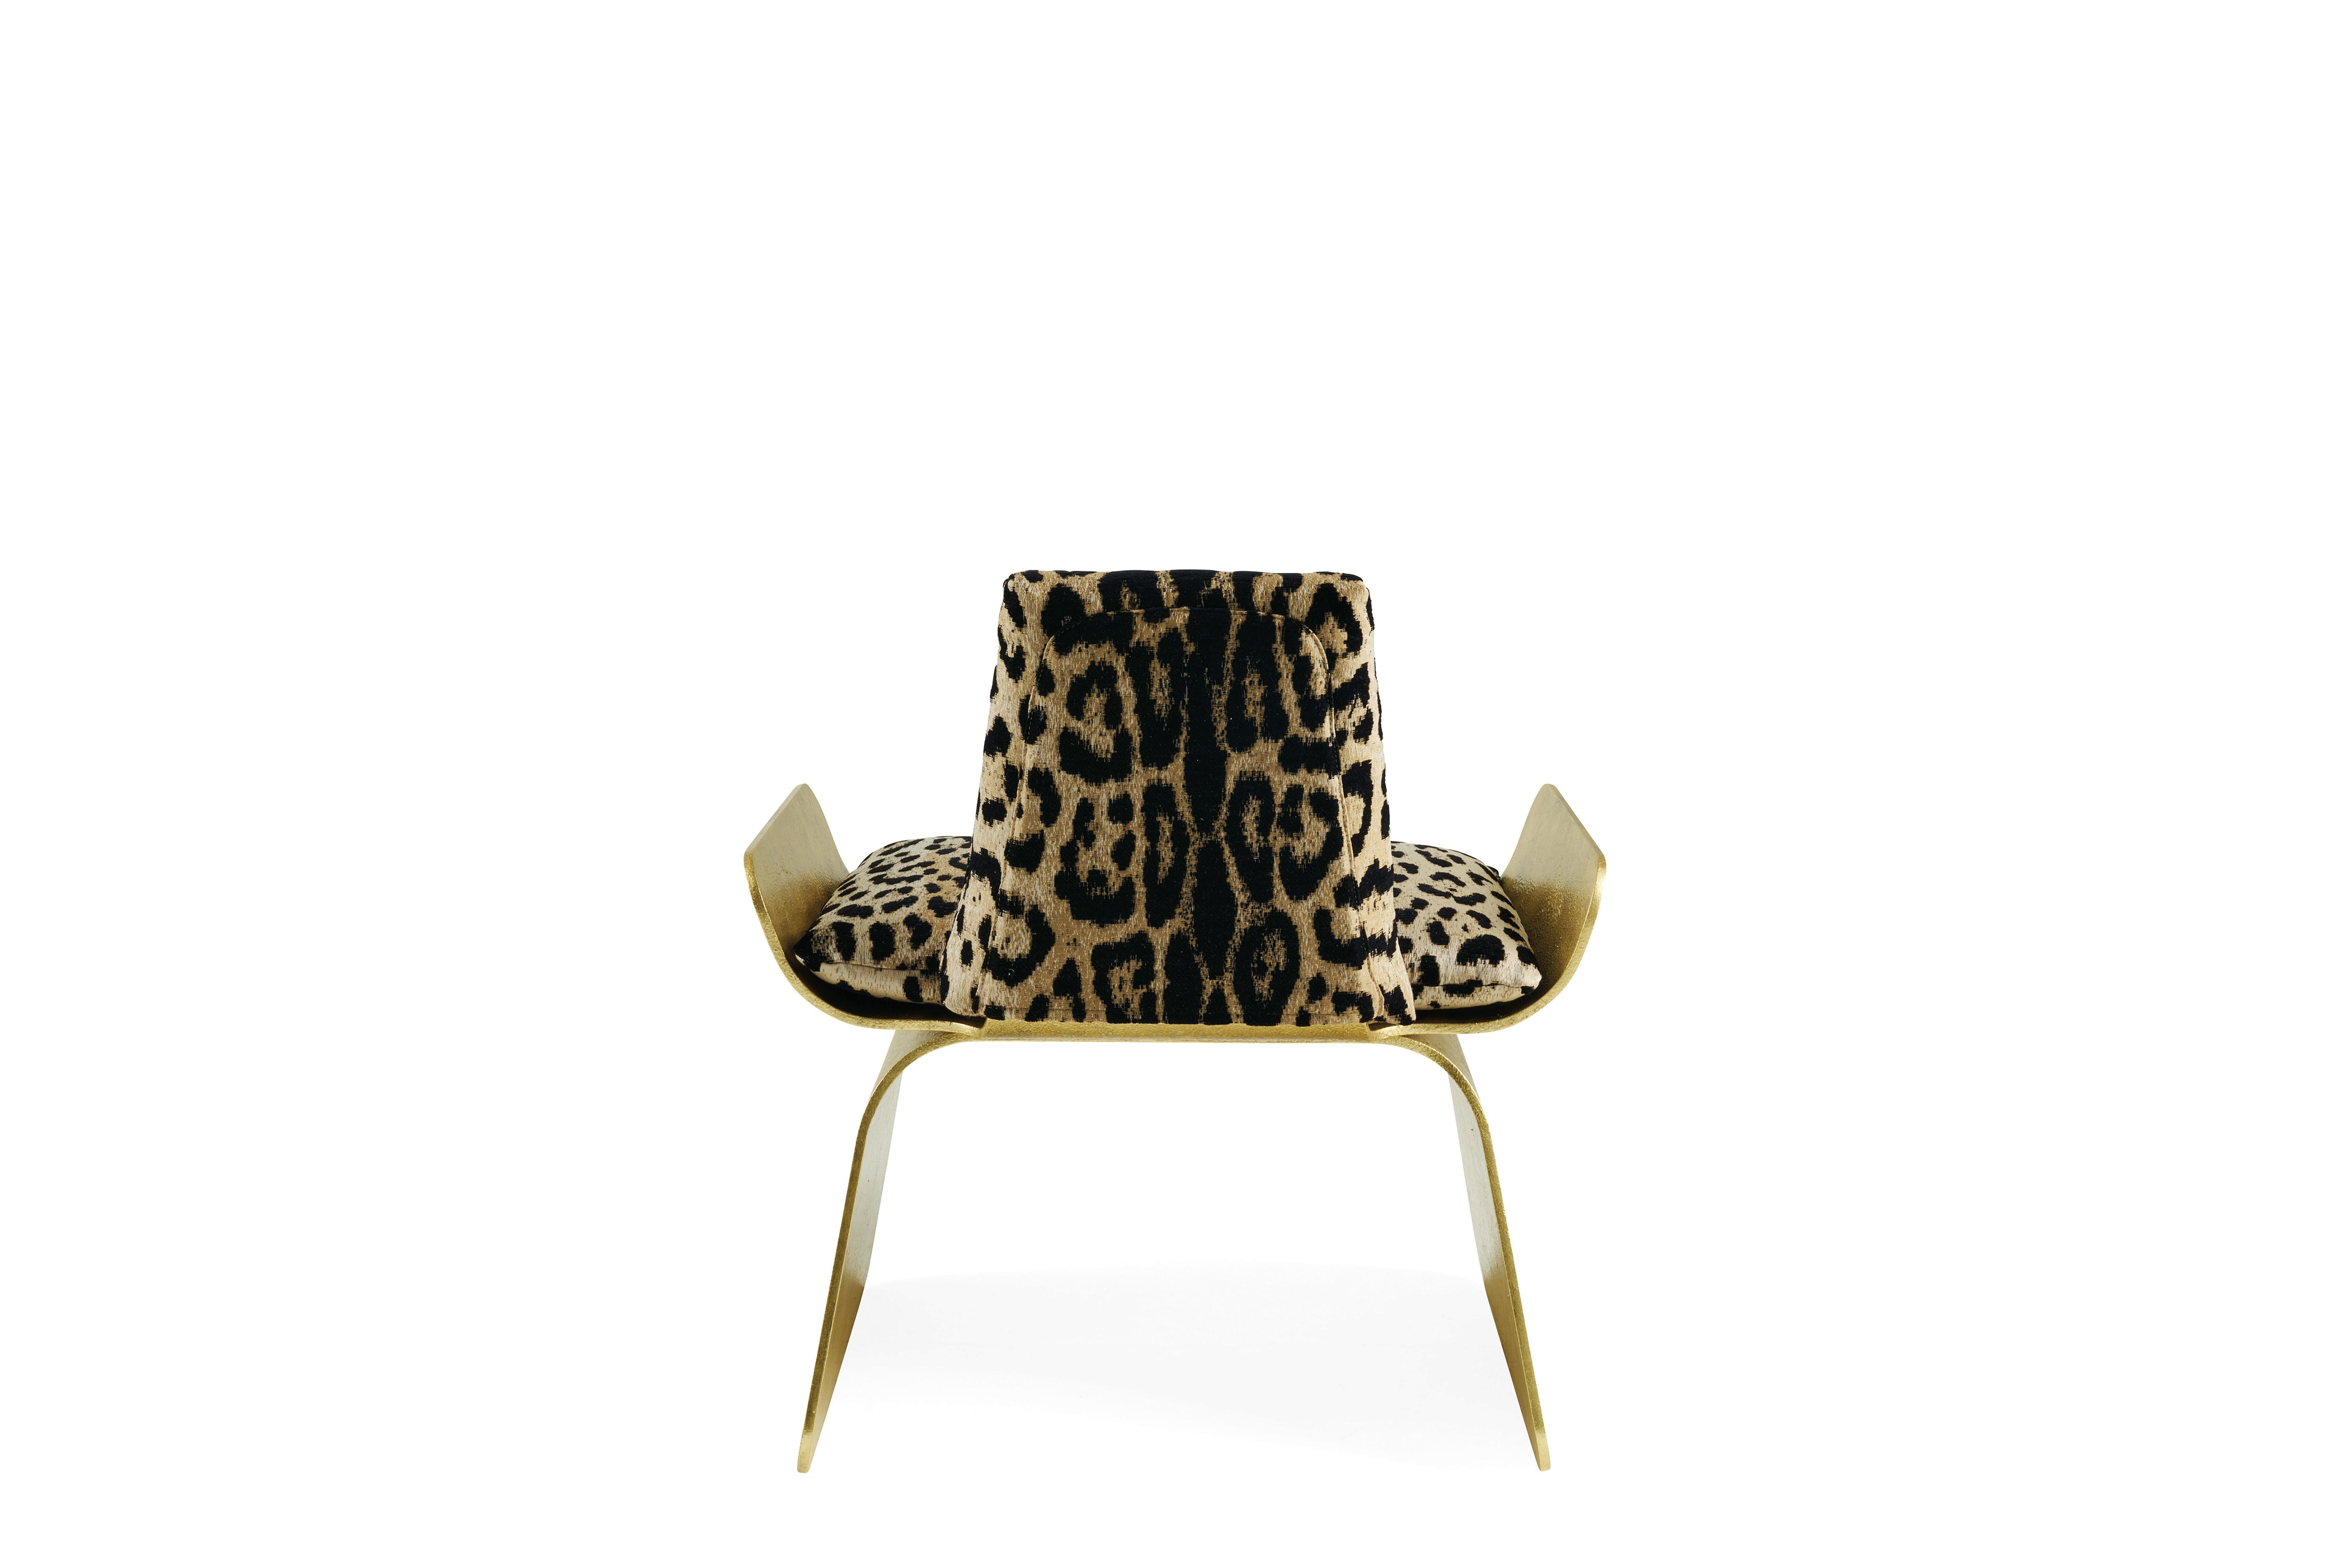 21st Century Iranja Armchair in Jacquard by Roberto Cavalli Home Interiors In New Condition For Sale In Cantù, Lombardia